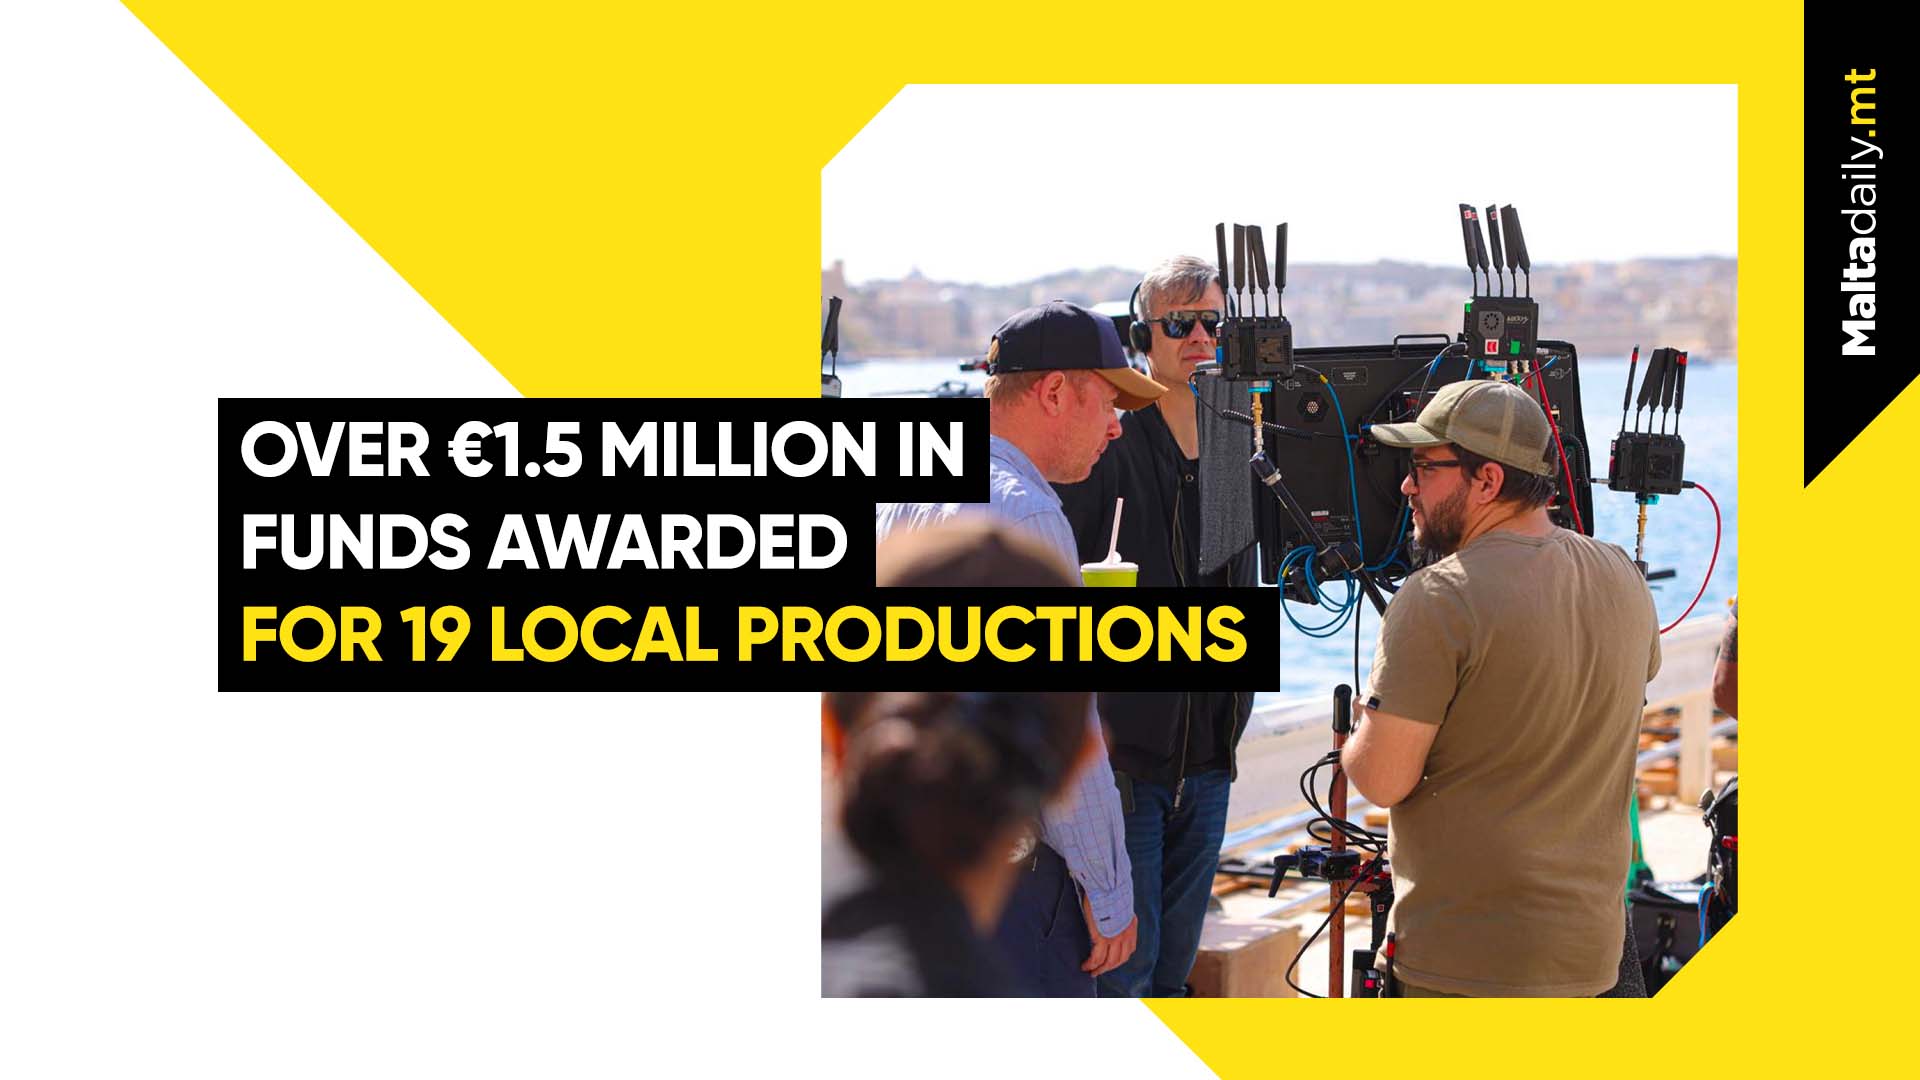 Over €1.5 Million In Funds Awarded For 19 Local Productions